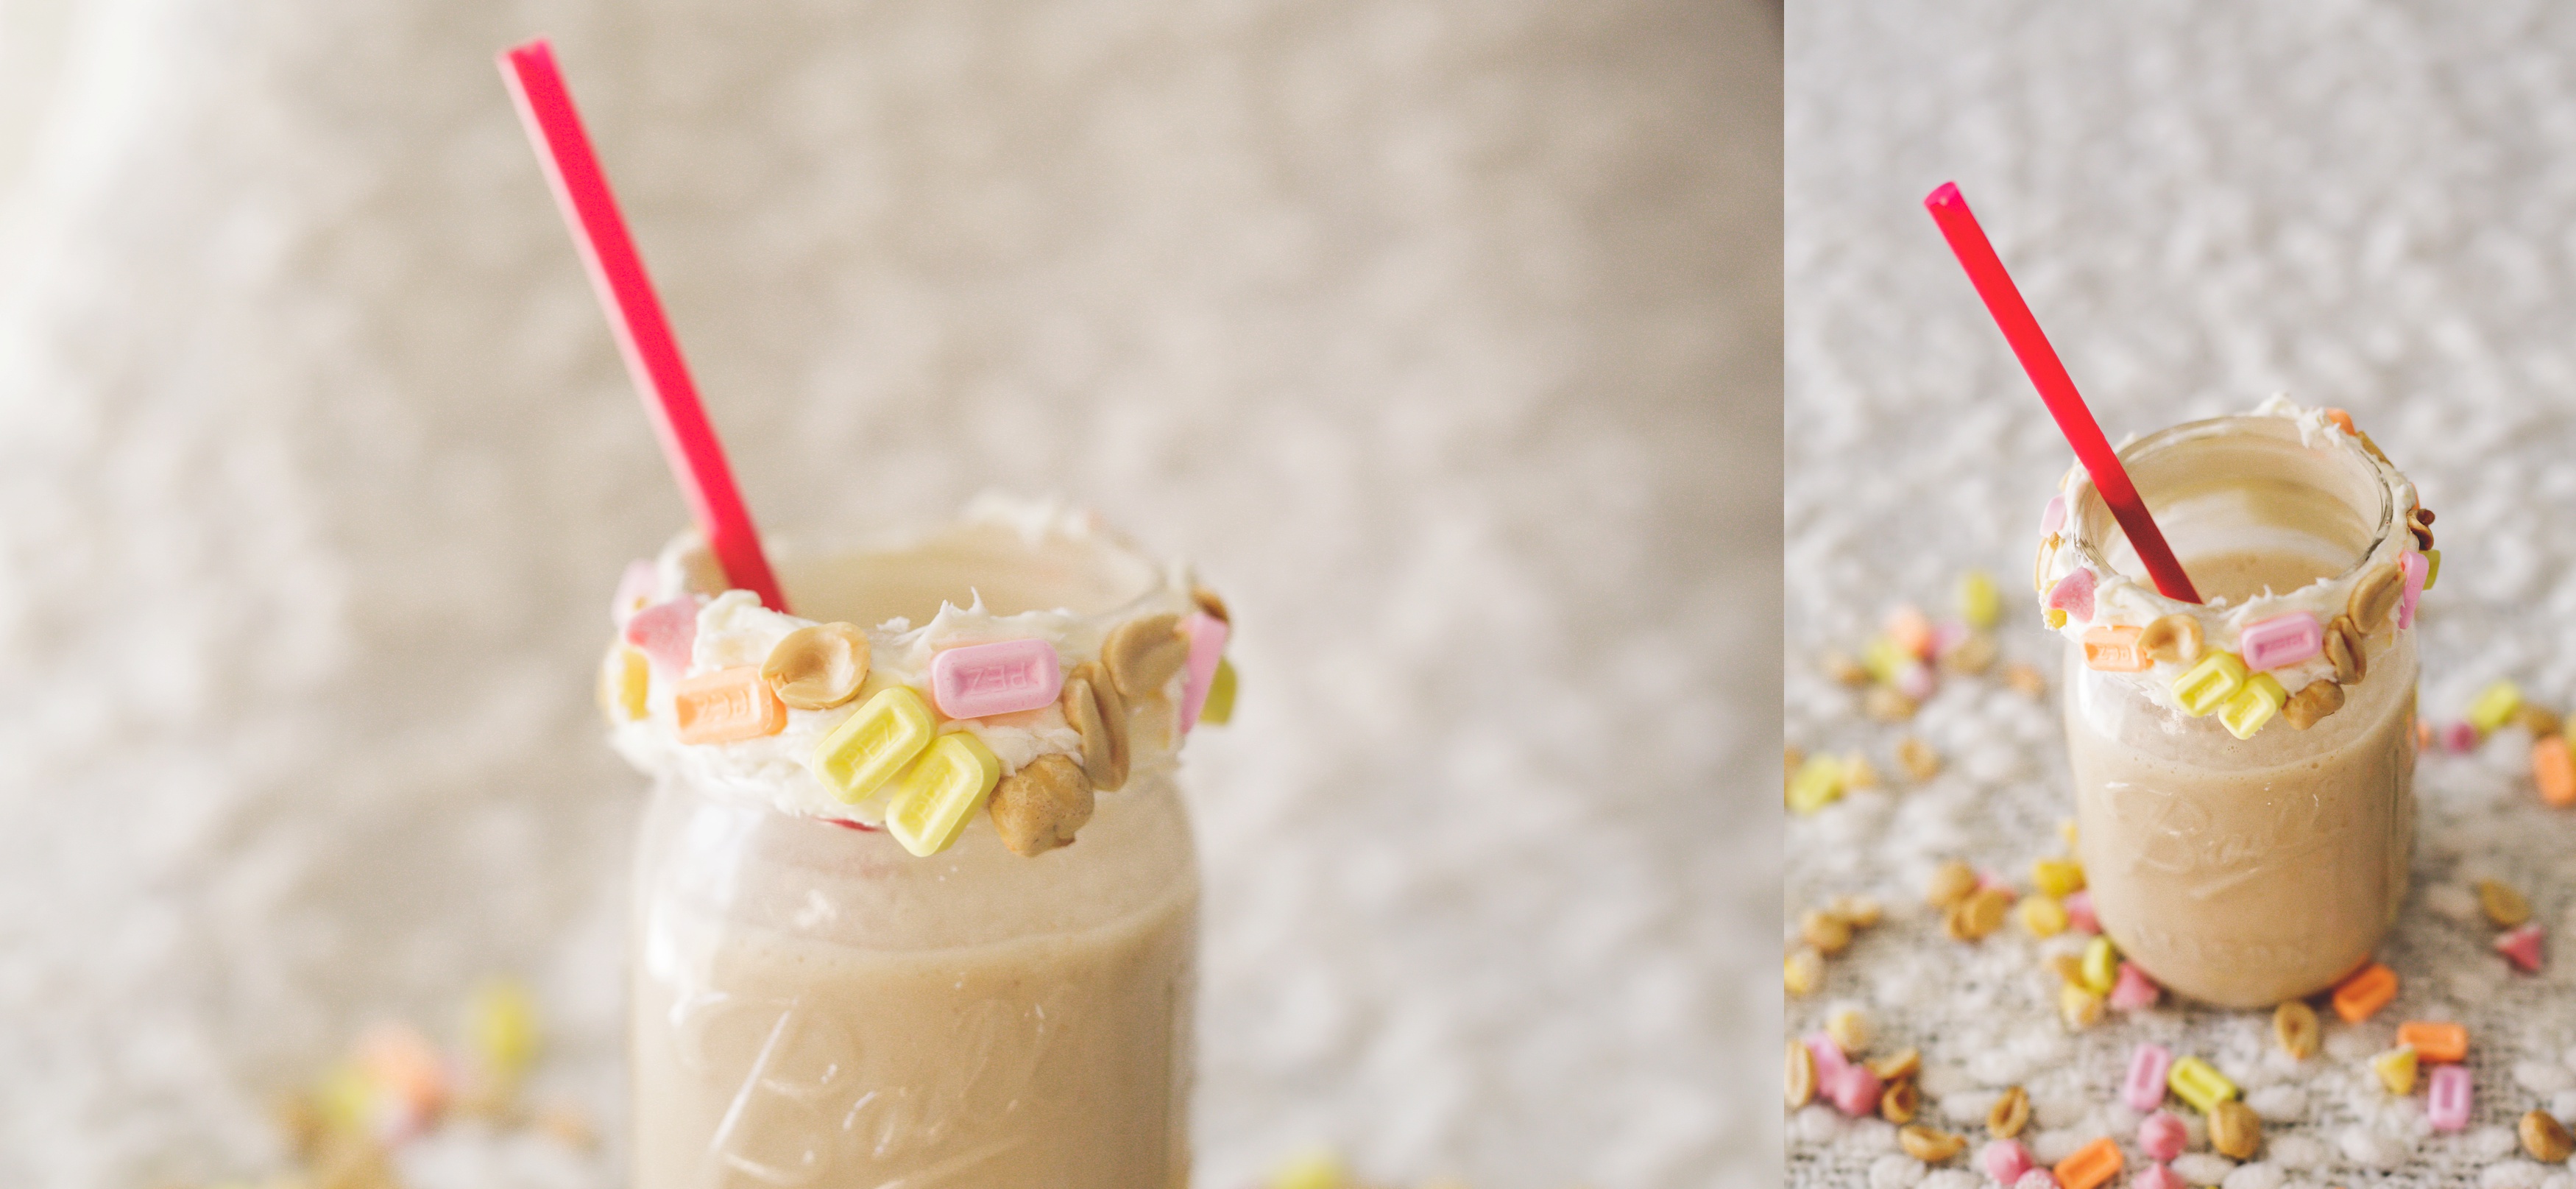 Dumbo Inspired Peanut Smoothie, Magic for Miles, Fun Friday